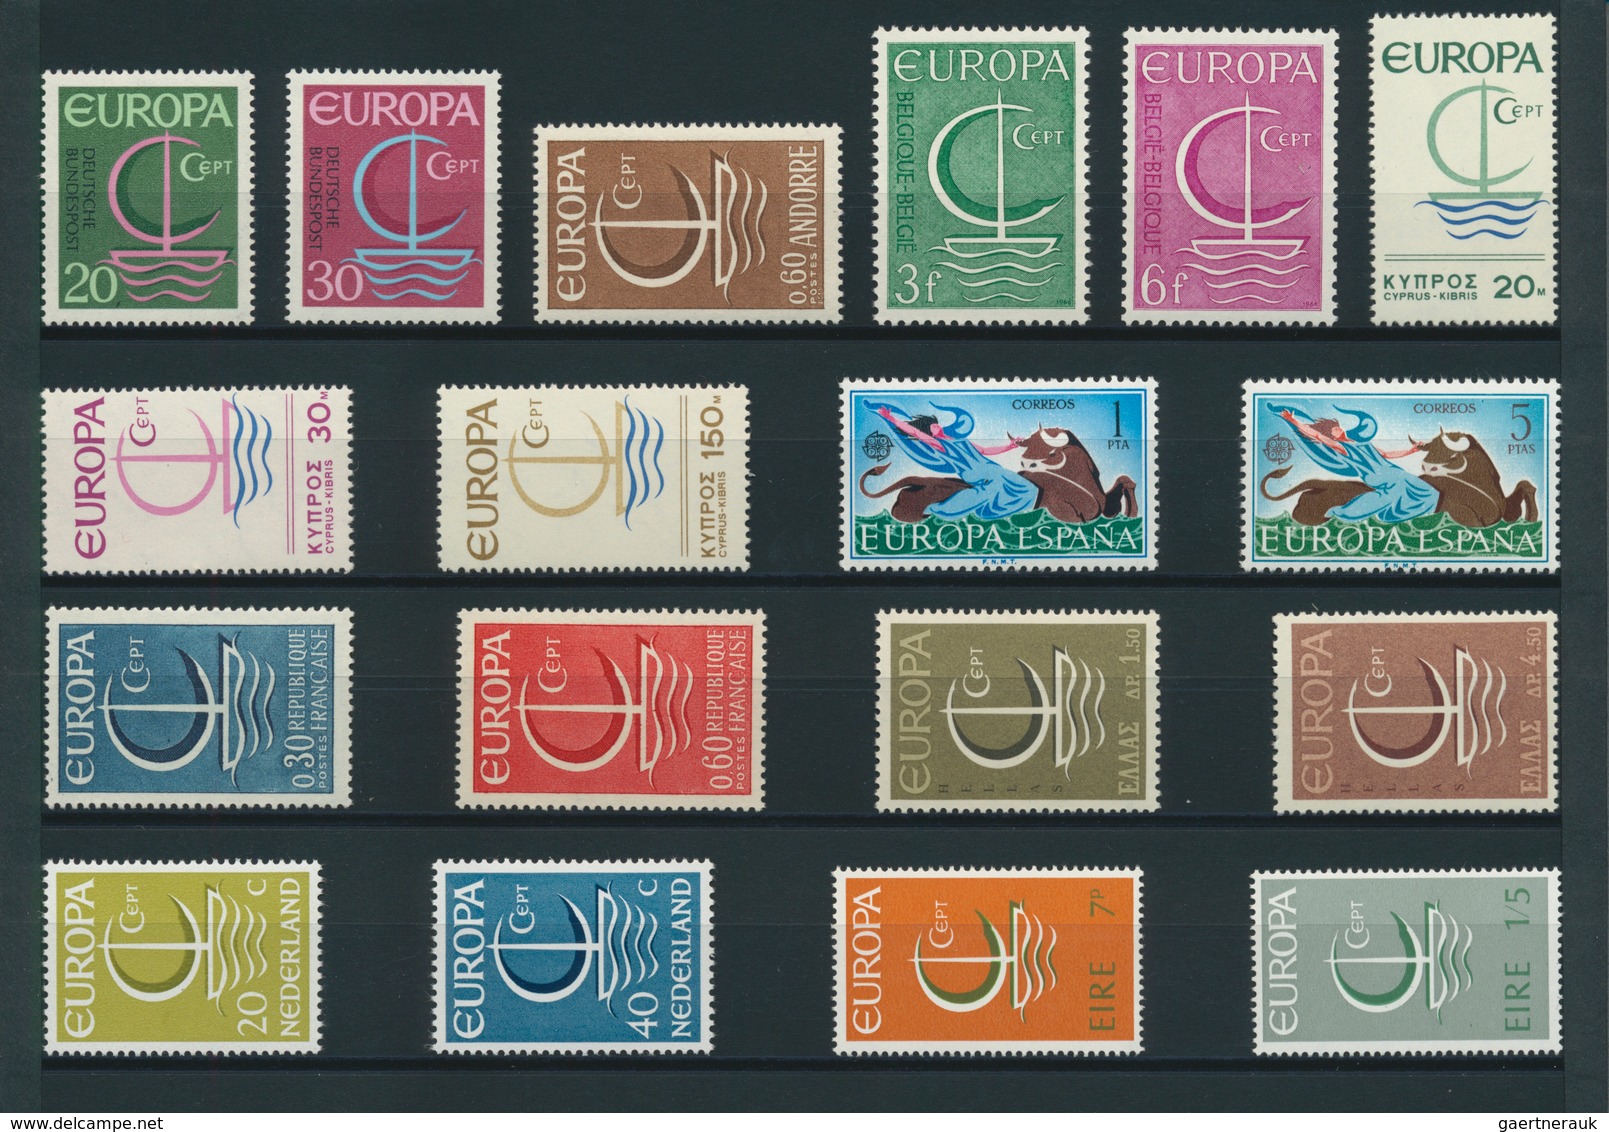 Europa-Union (CEPT): Mint Never Hinged Collection Of The Joint Issues; Complete In The Main Numbers; - Sonstige - Europa